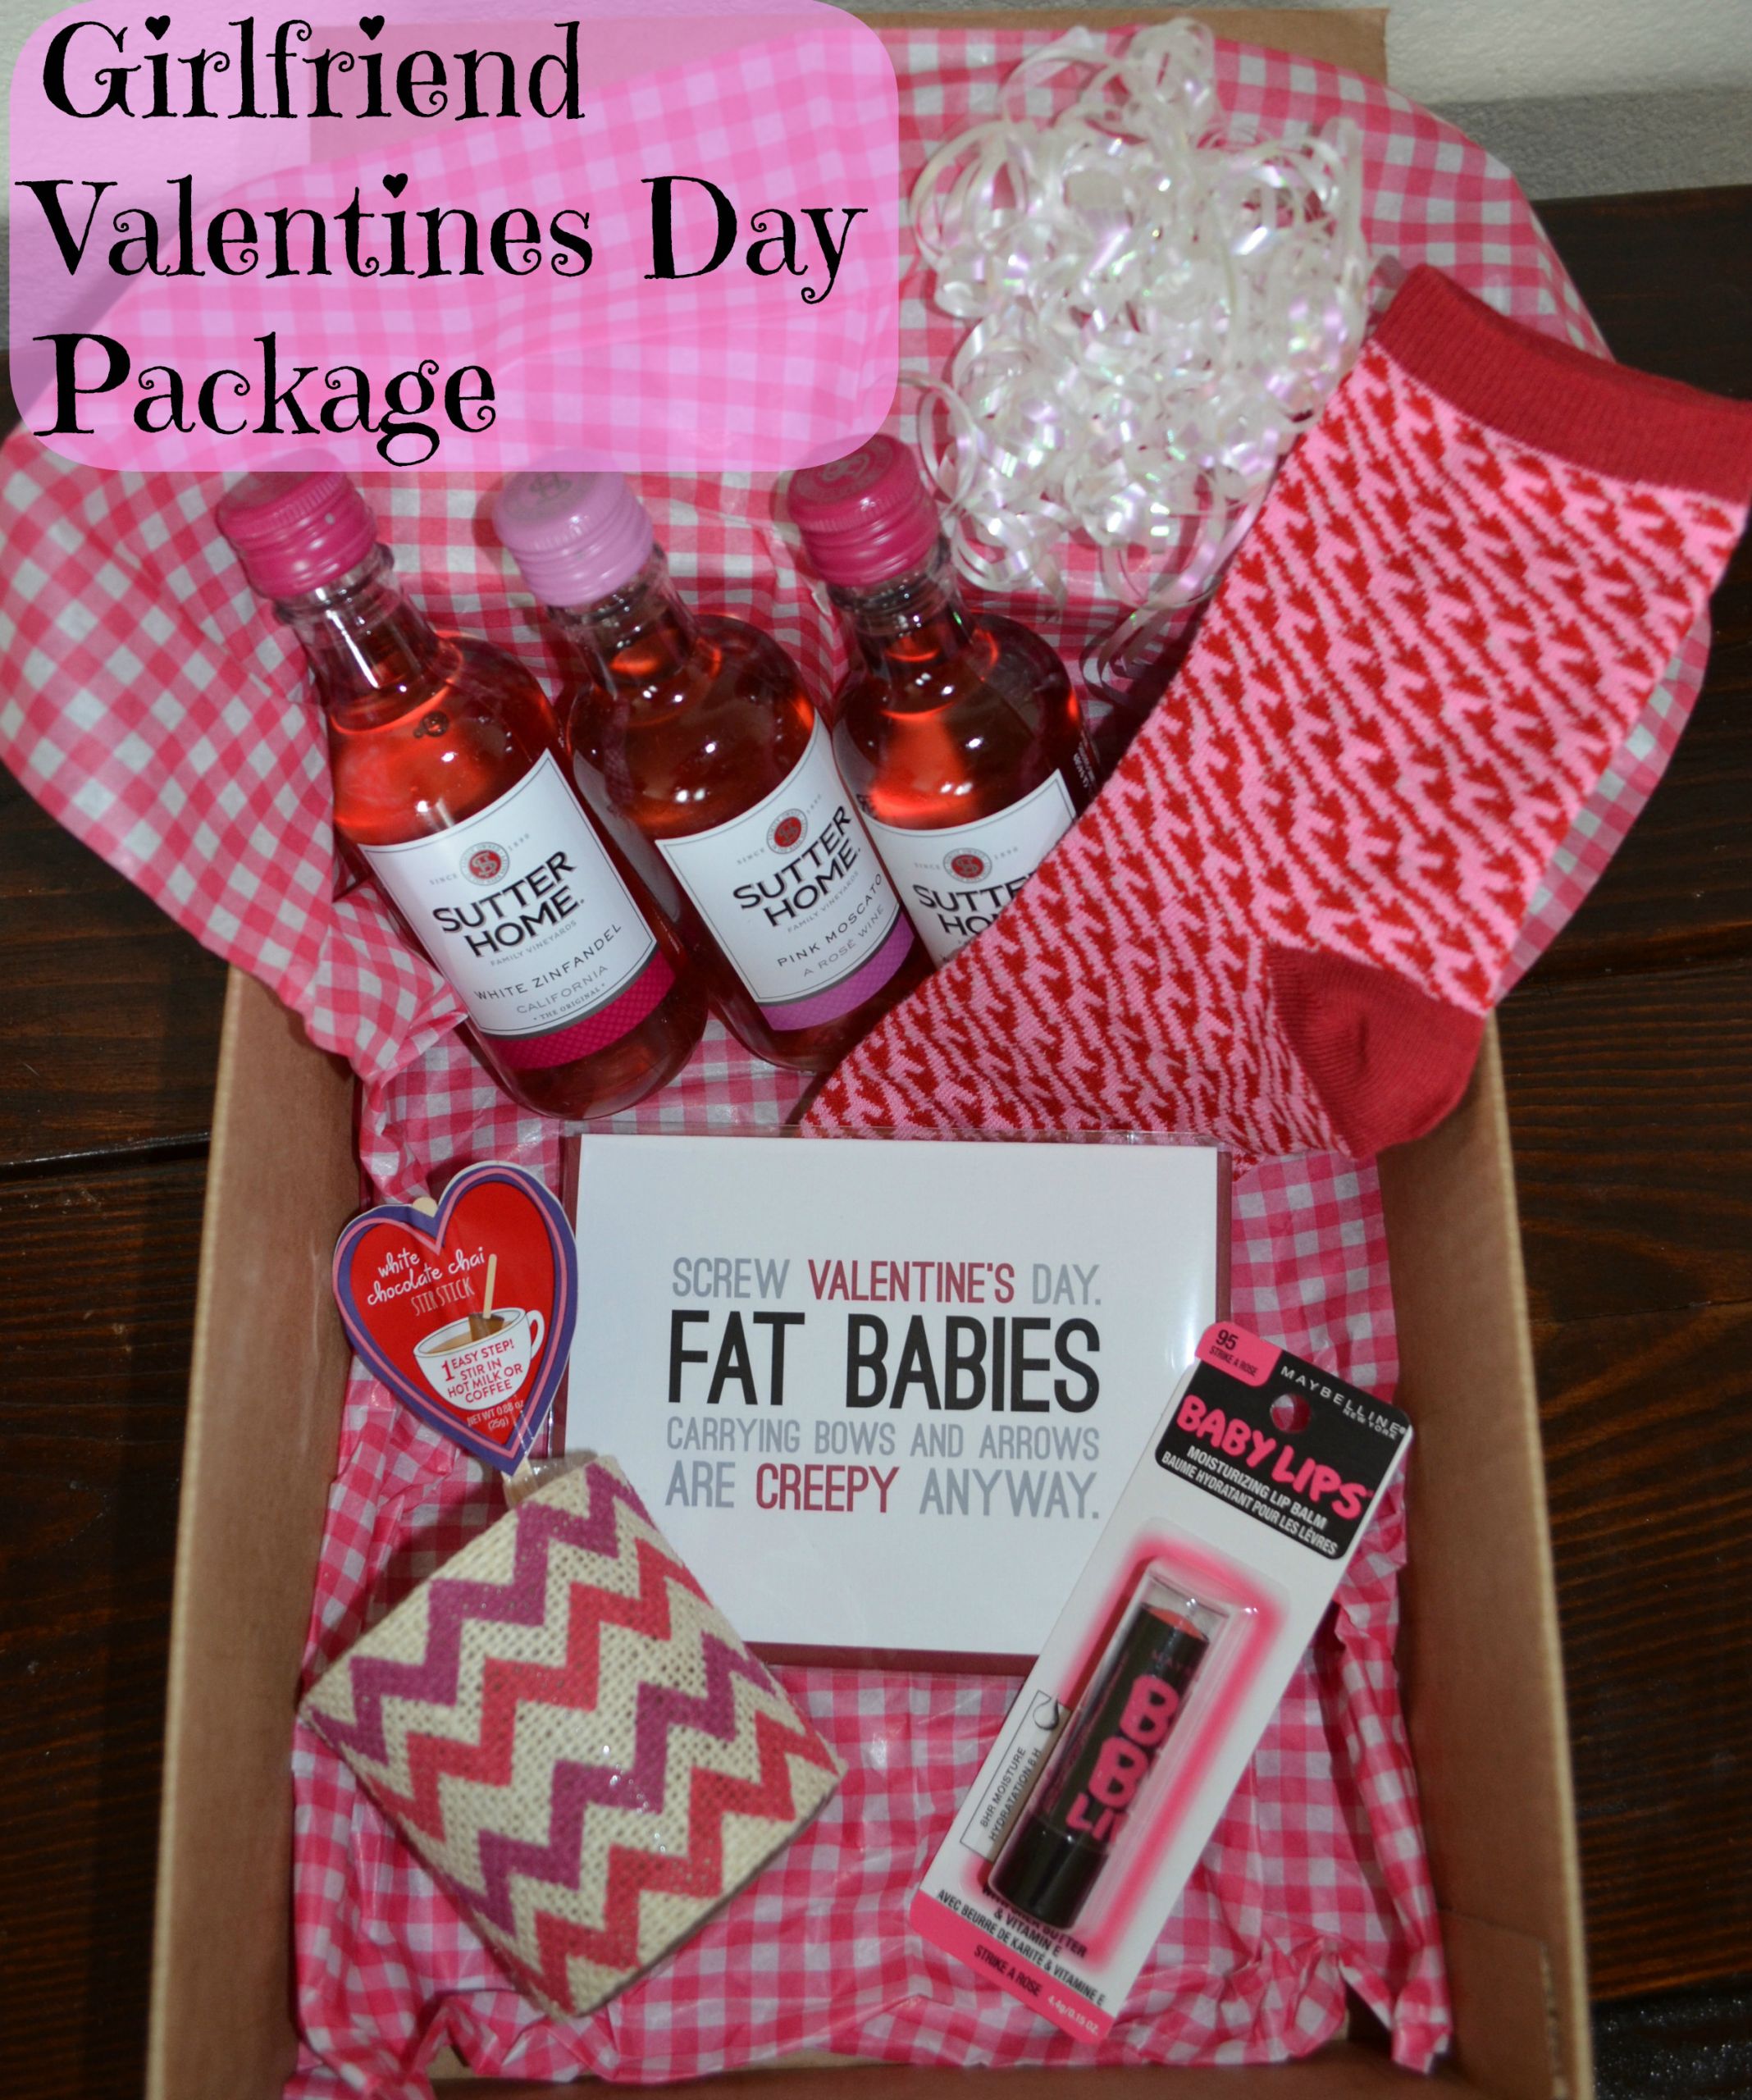 Cute Valentines Gift Ideas
 24 ADORABLE GIFT IDEAS FOR THE WOMEN IN YOUR LIFE